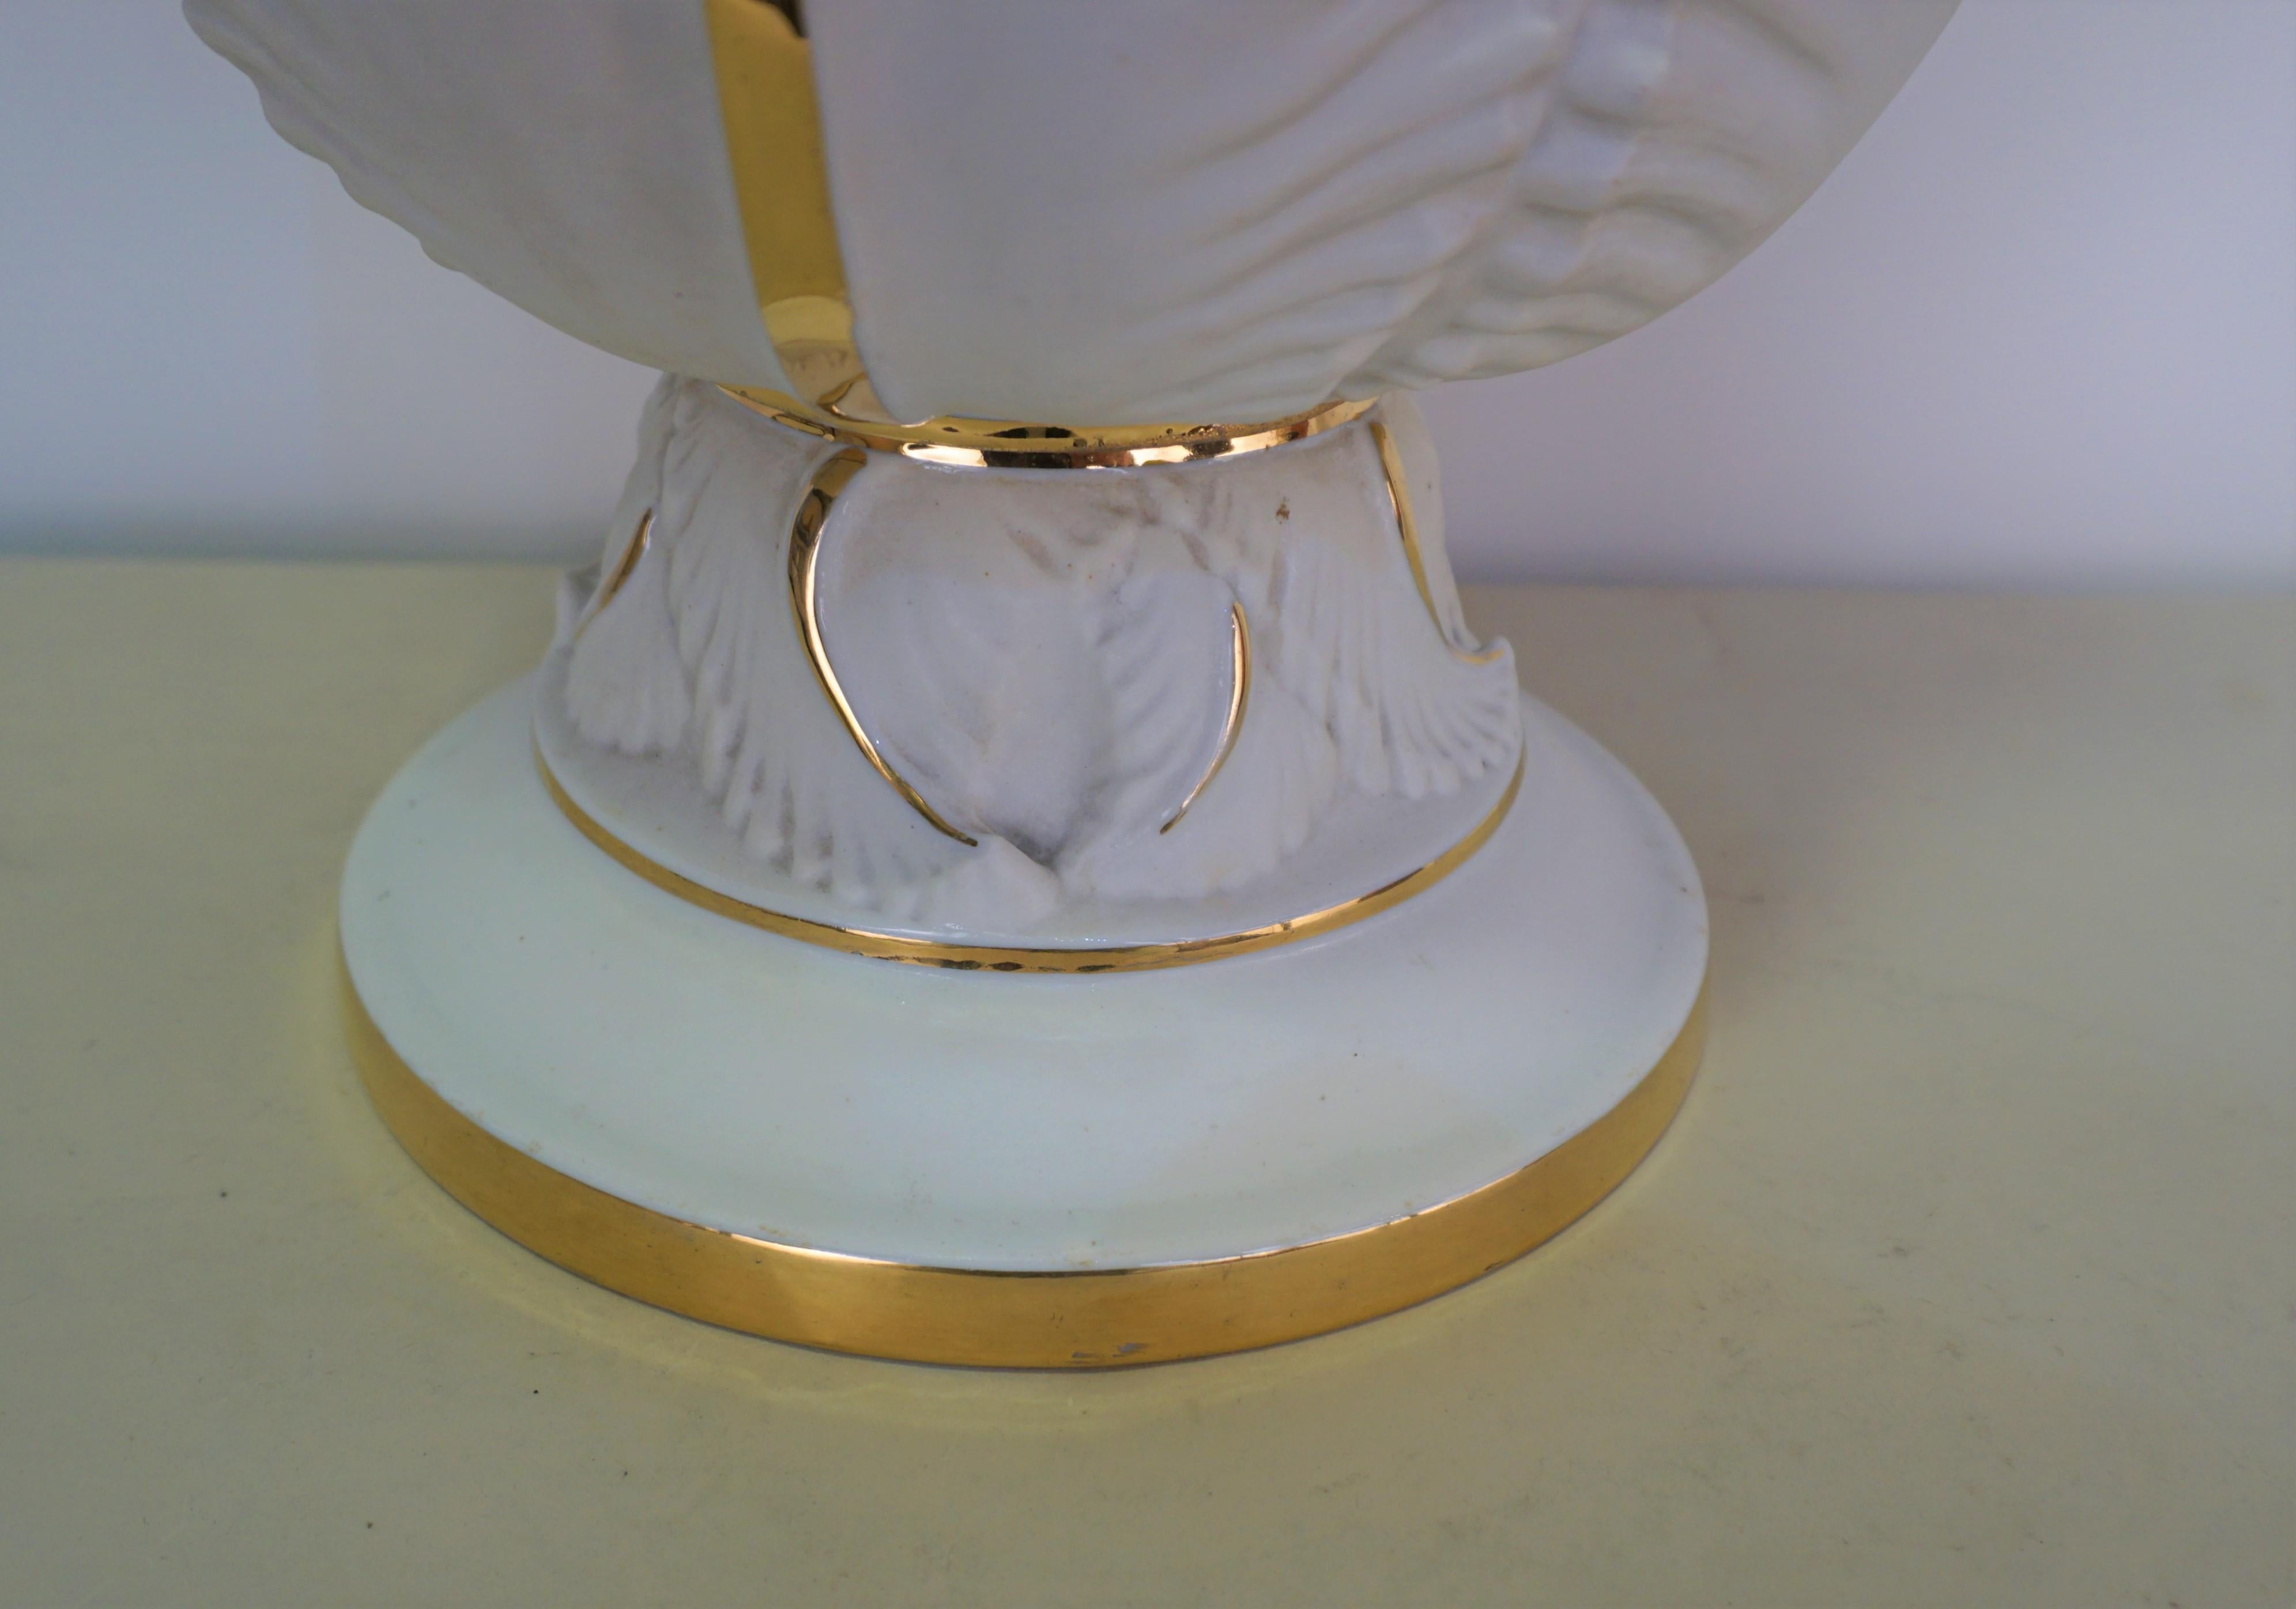 Upright Table Lamp Limoges Porcelain In Good Condition For Sale In Fairfax, VA